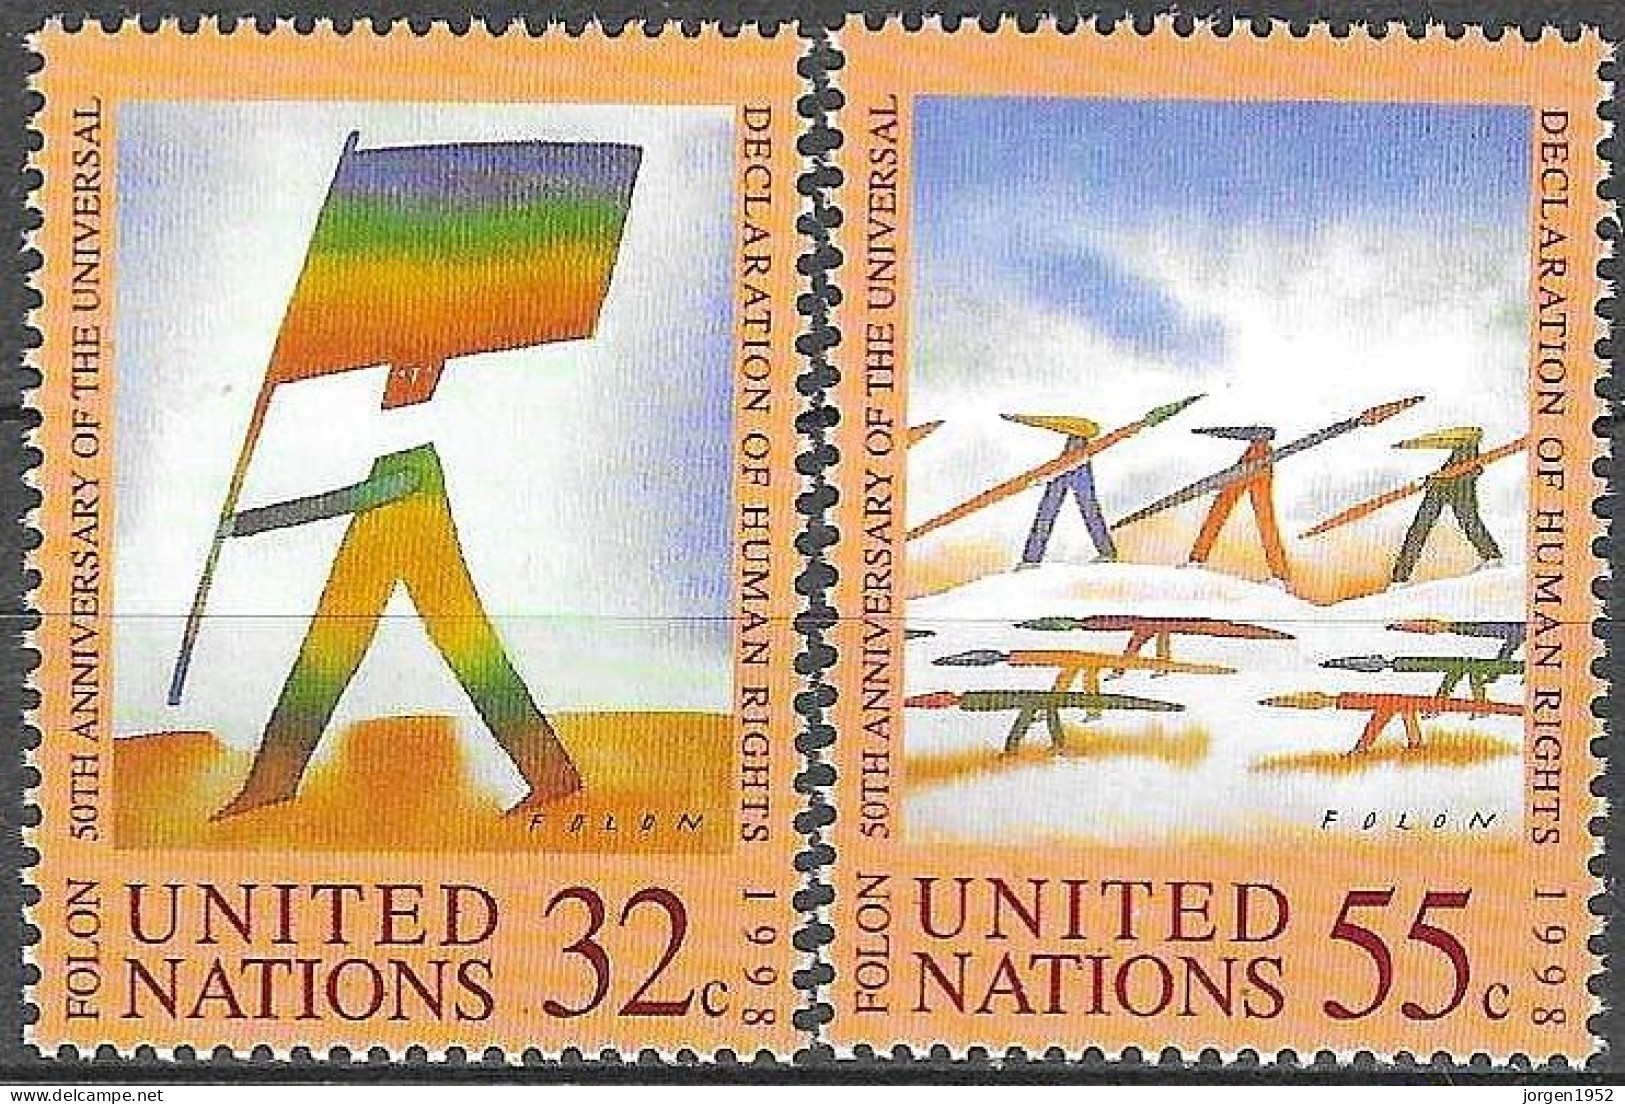 UNITED NATIONS # NEW YORK FROM 1998 STAMPWORLD 787-88** - Unused Stamps